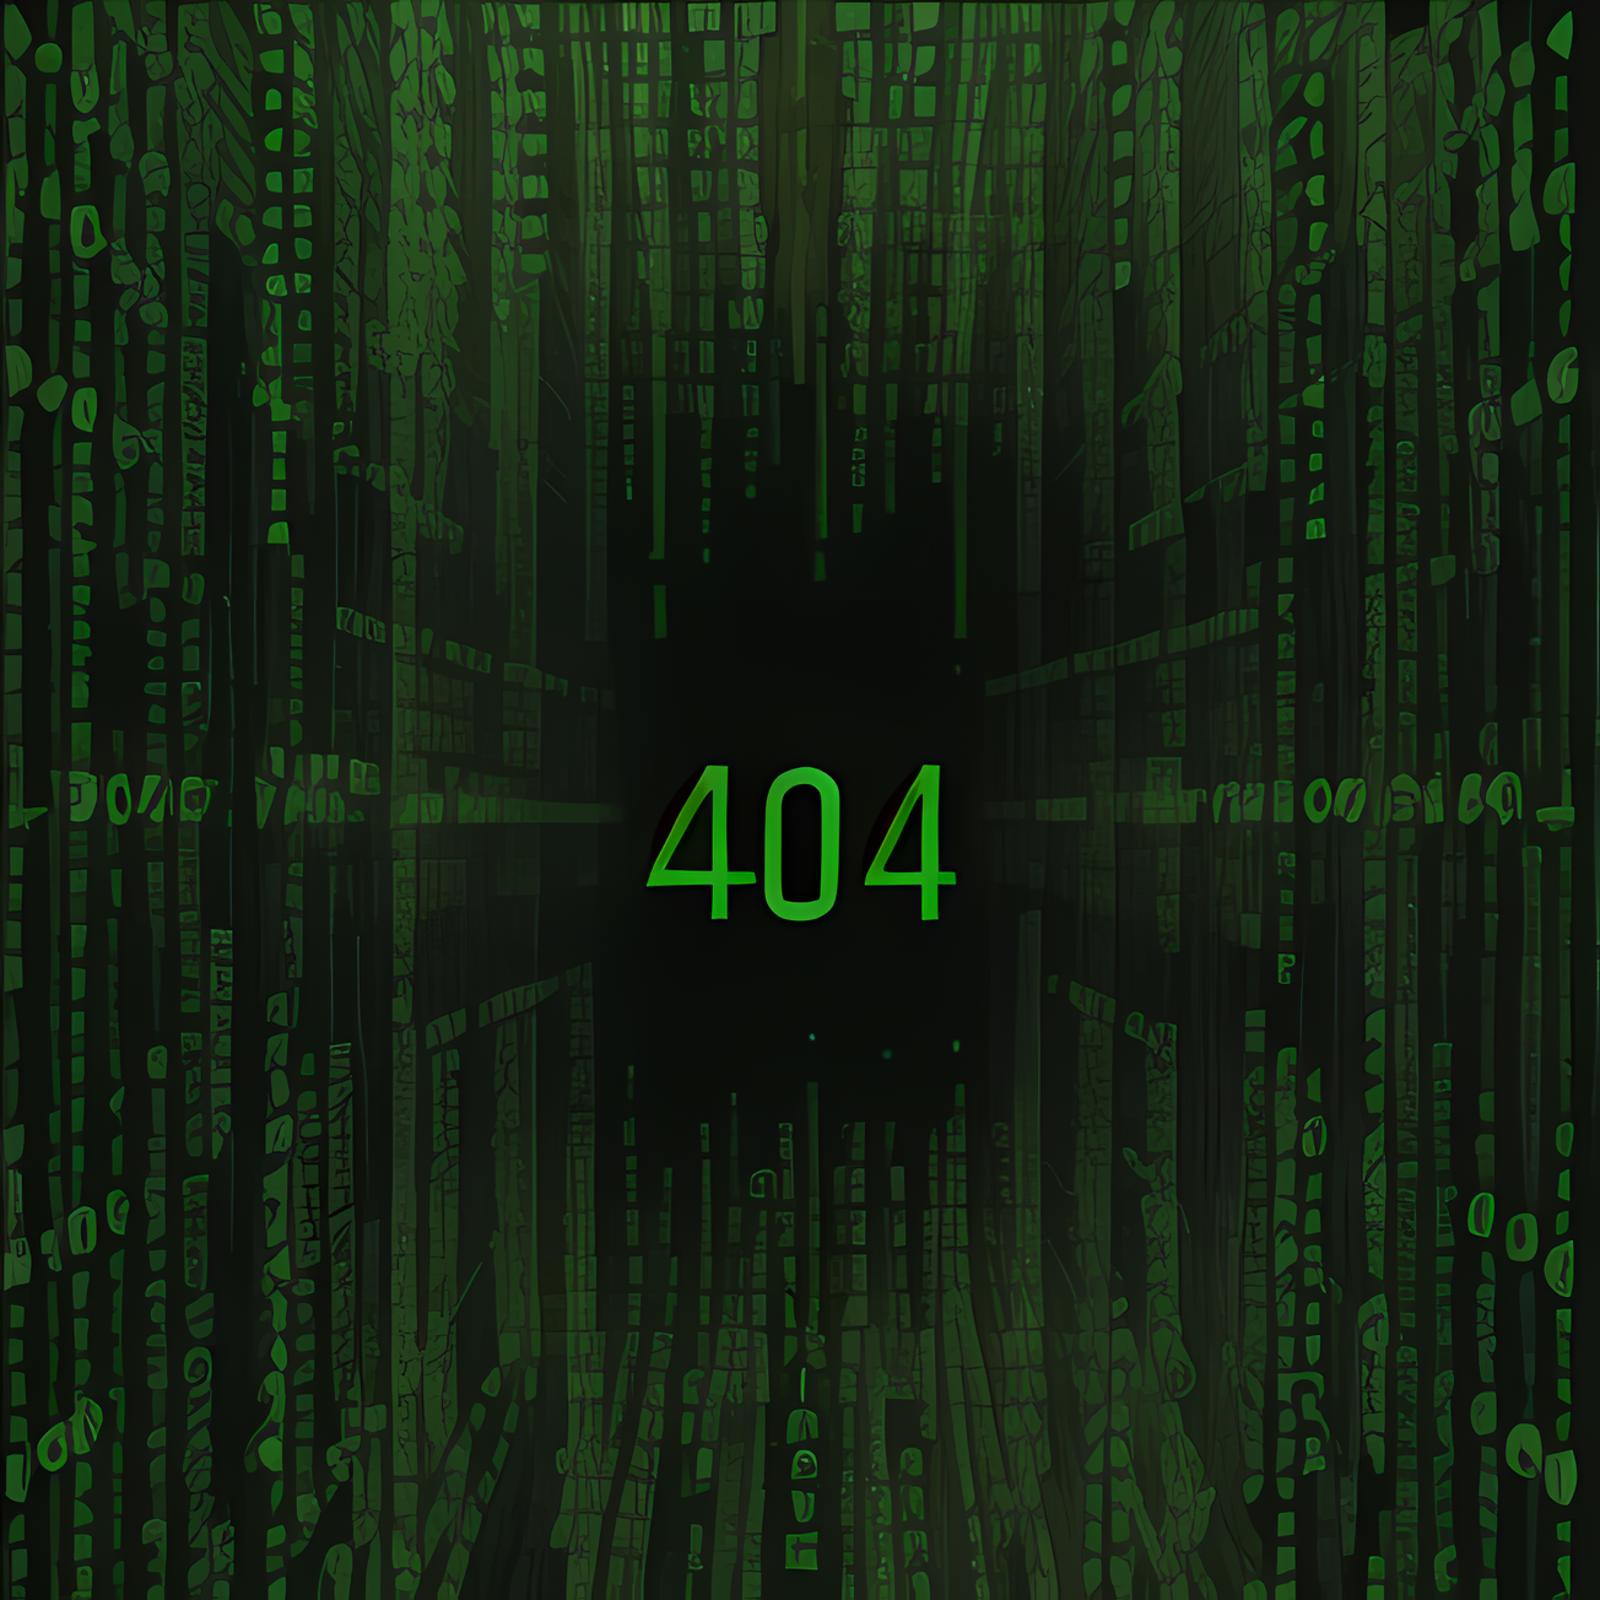 Digital Art with 404 Error Code and Green Background